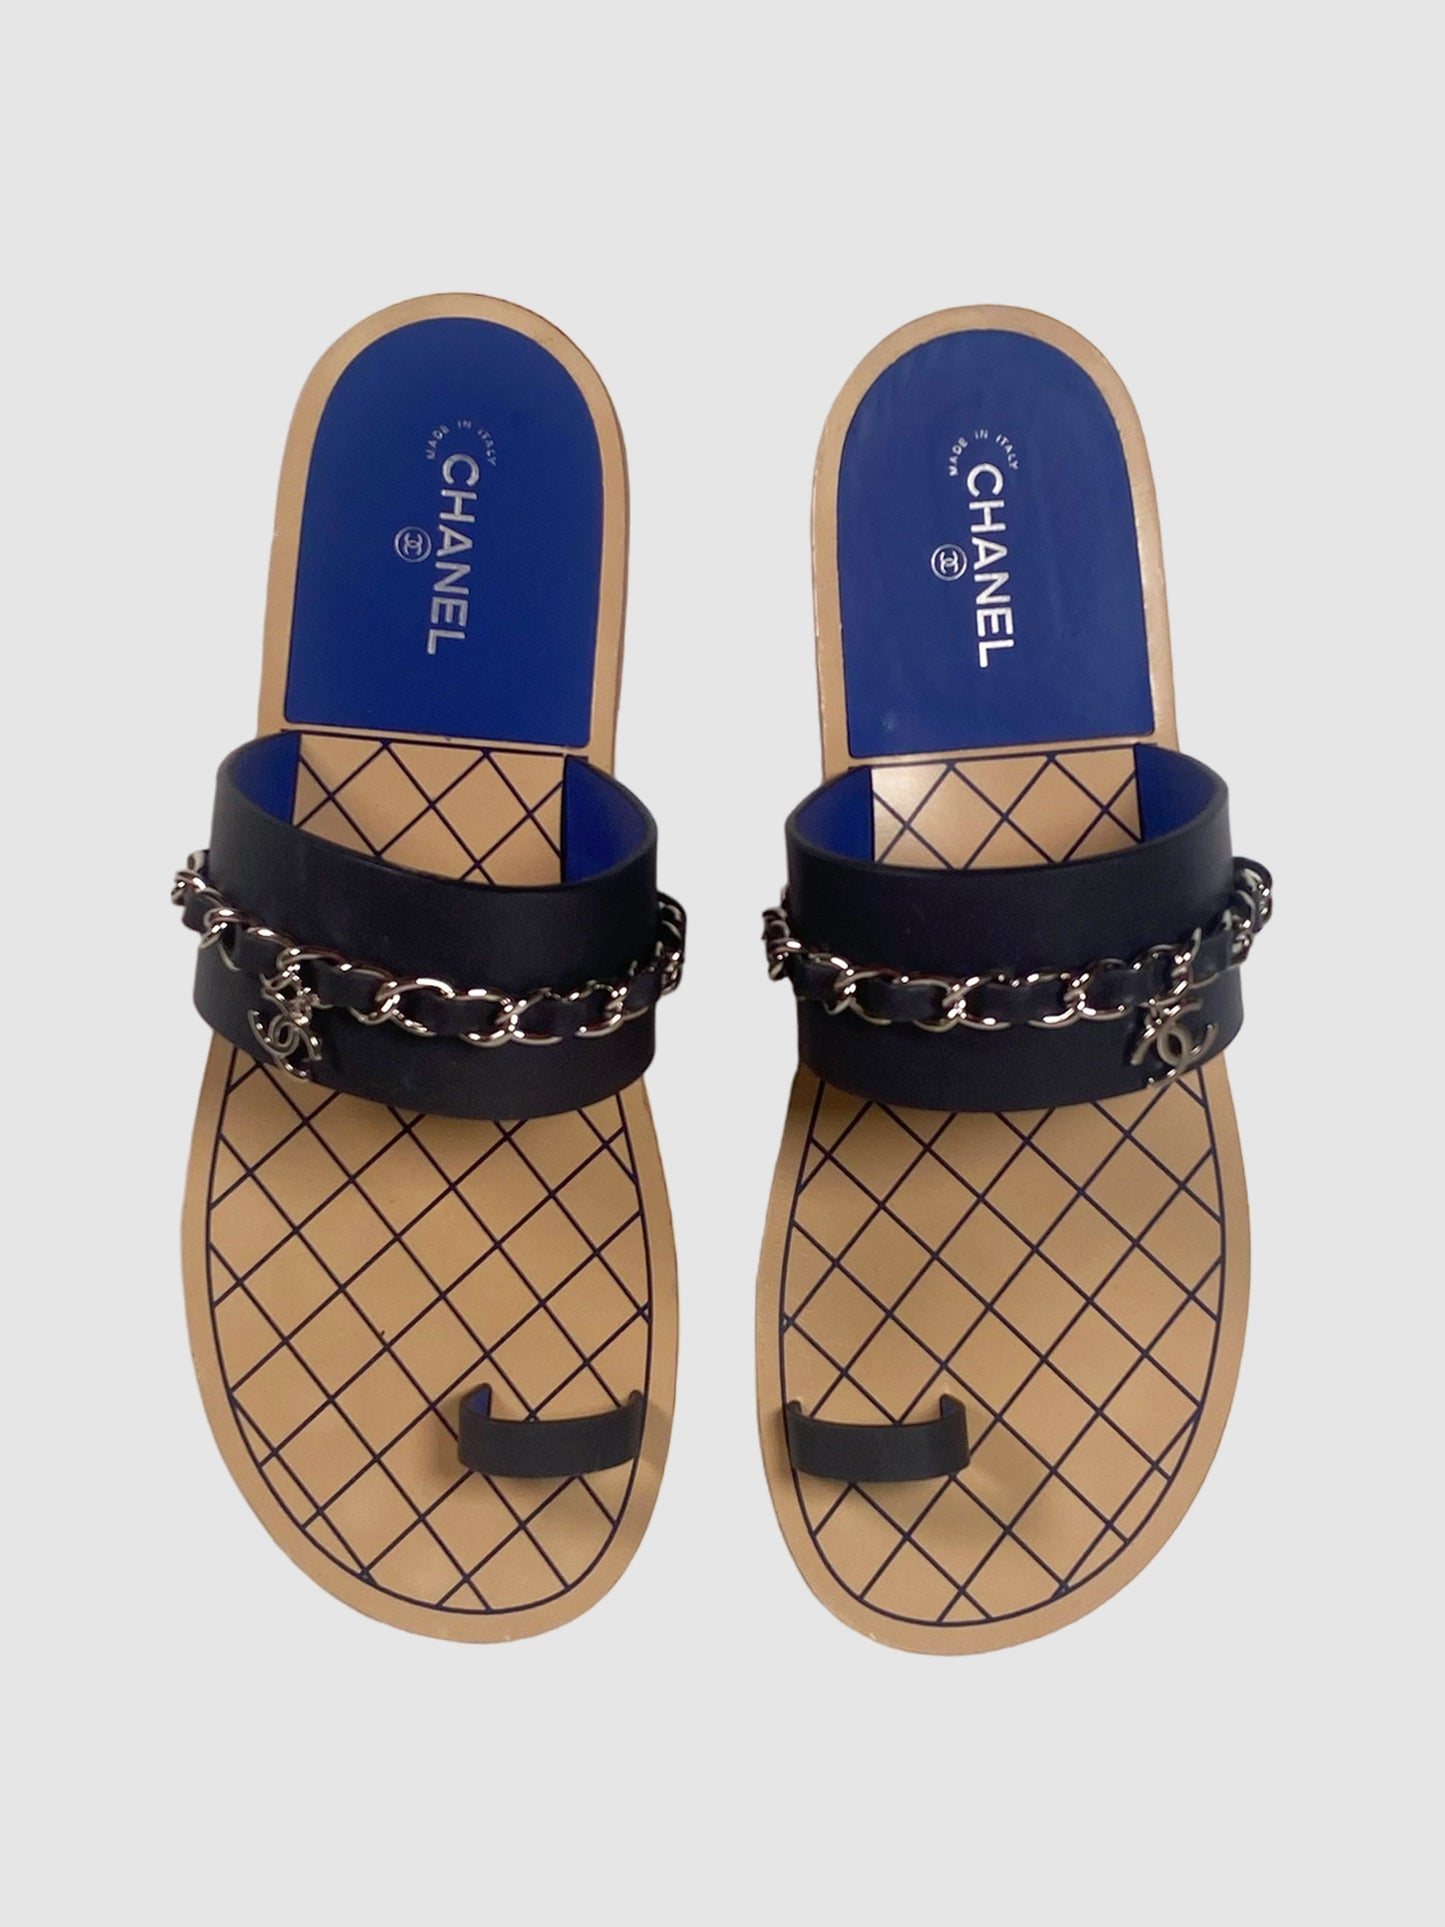 Chanel Flat Thong Sandals - Size 40